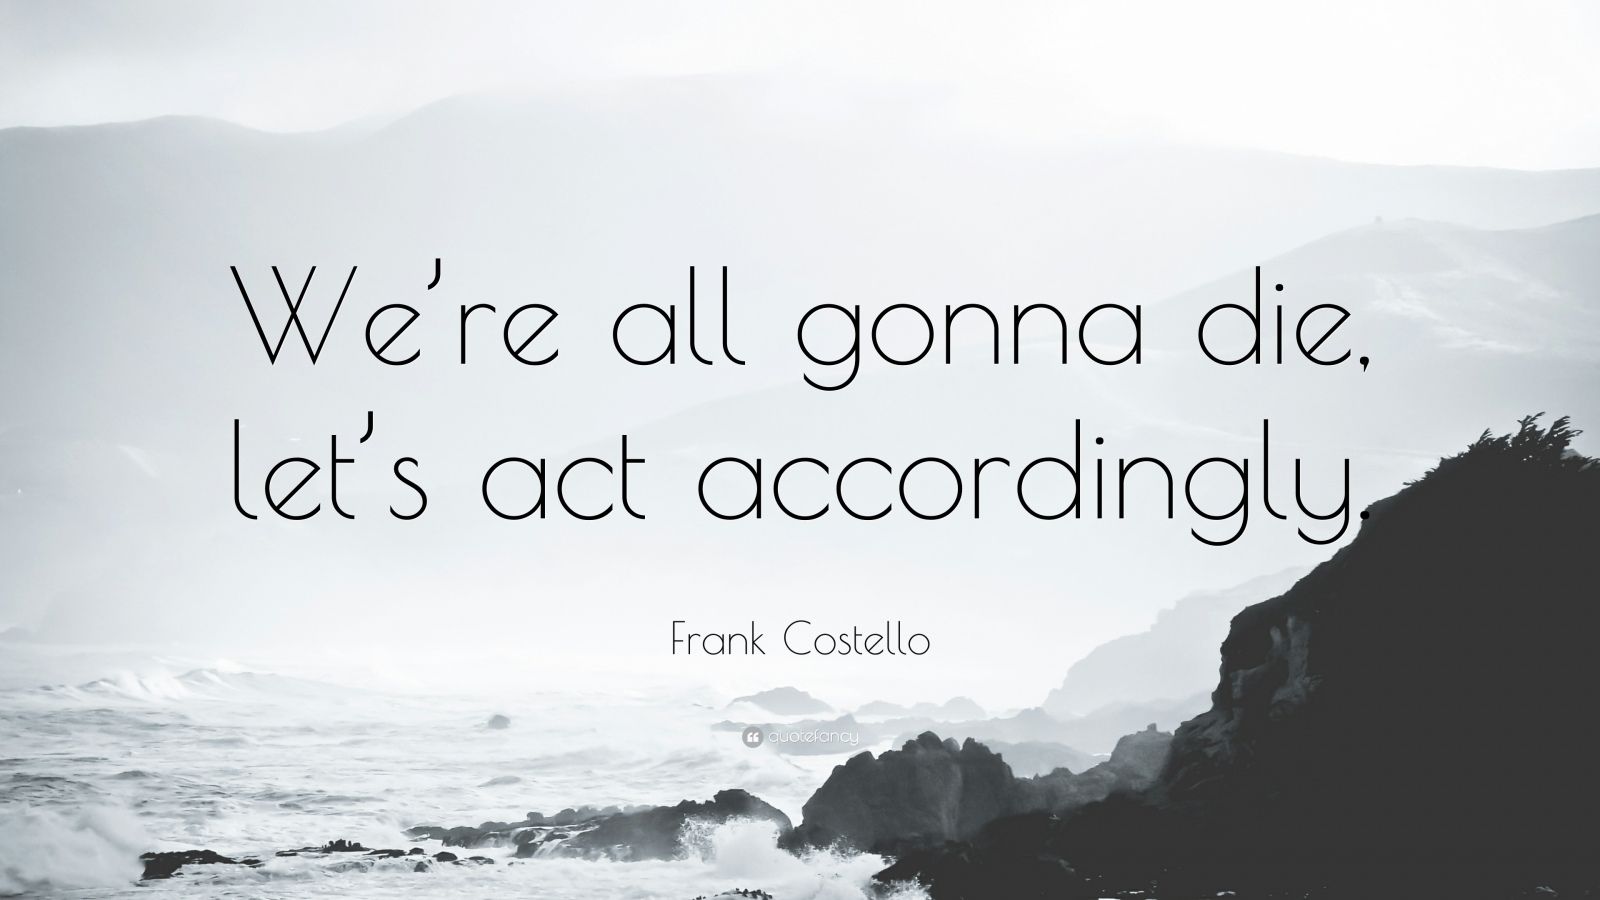 Frank Costello Quotes (9 wallpapers) - Quotefancy